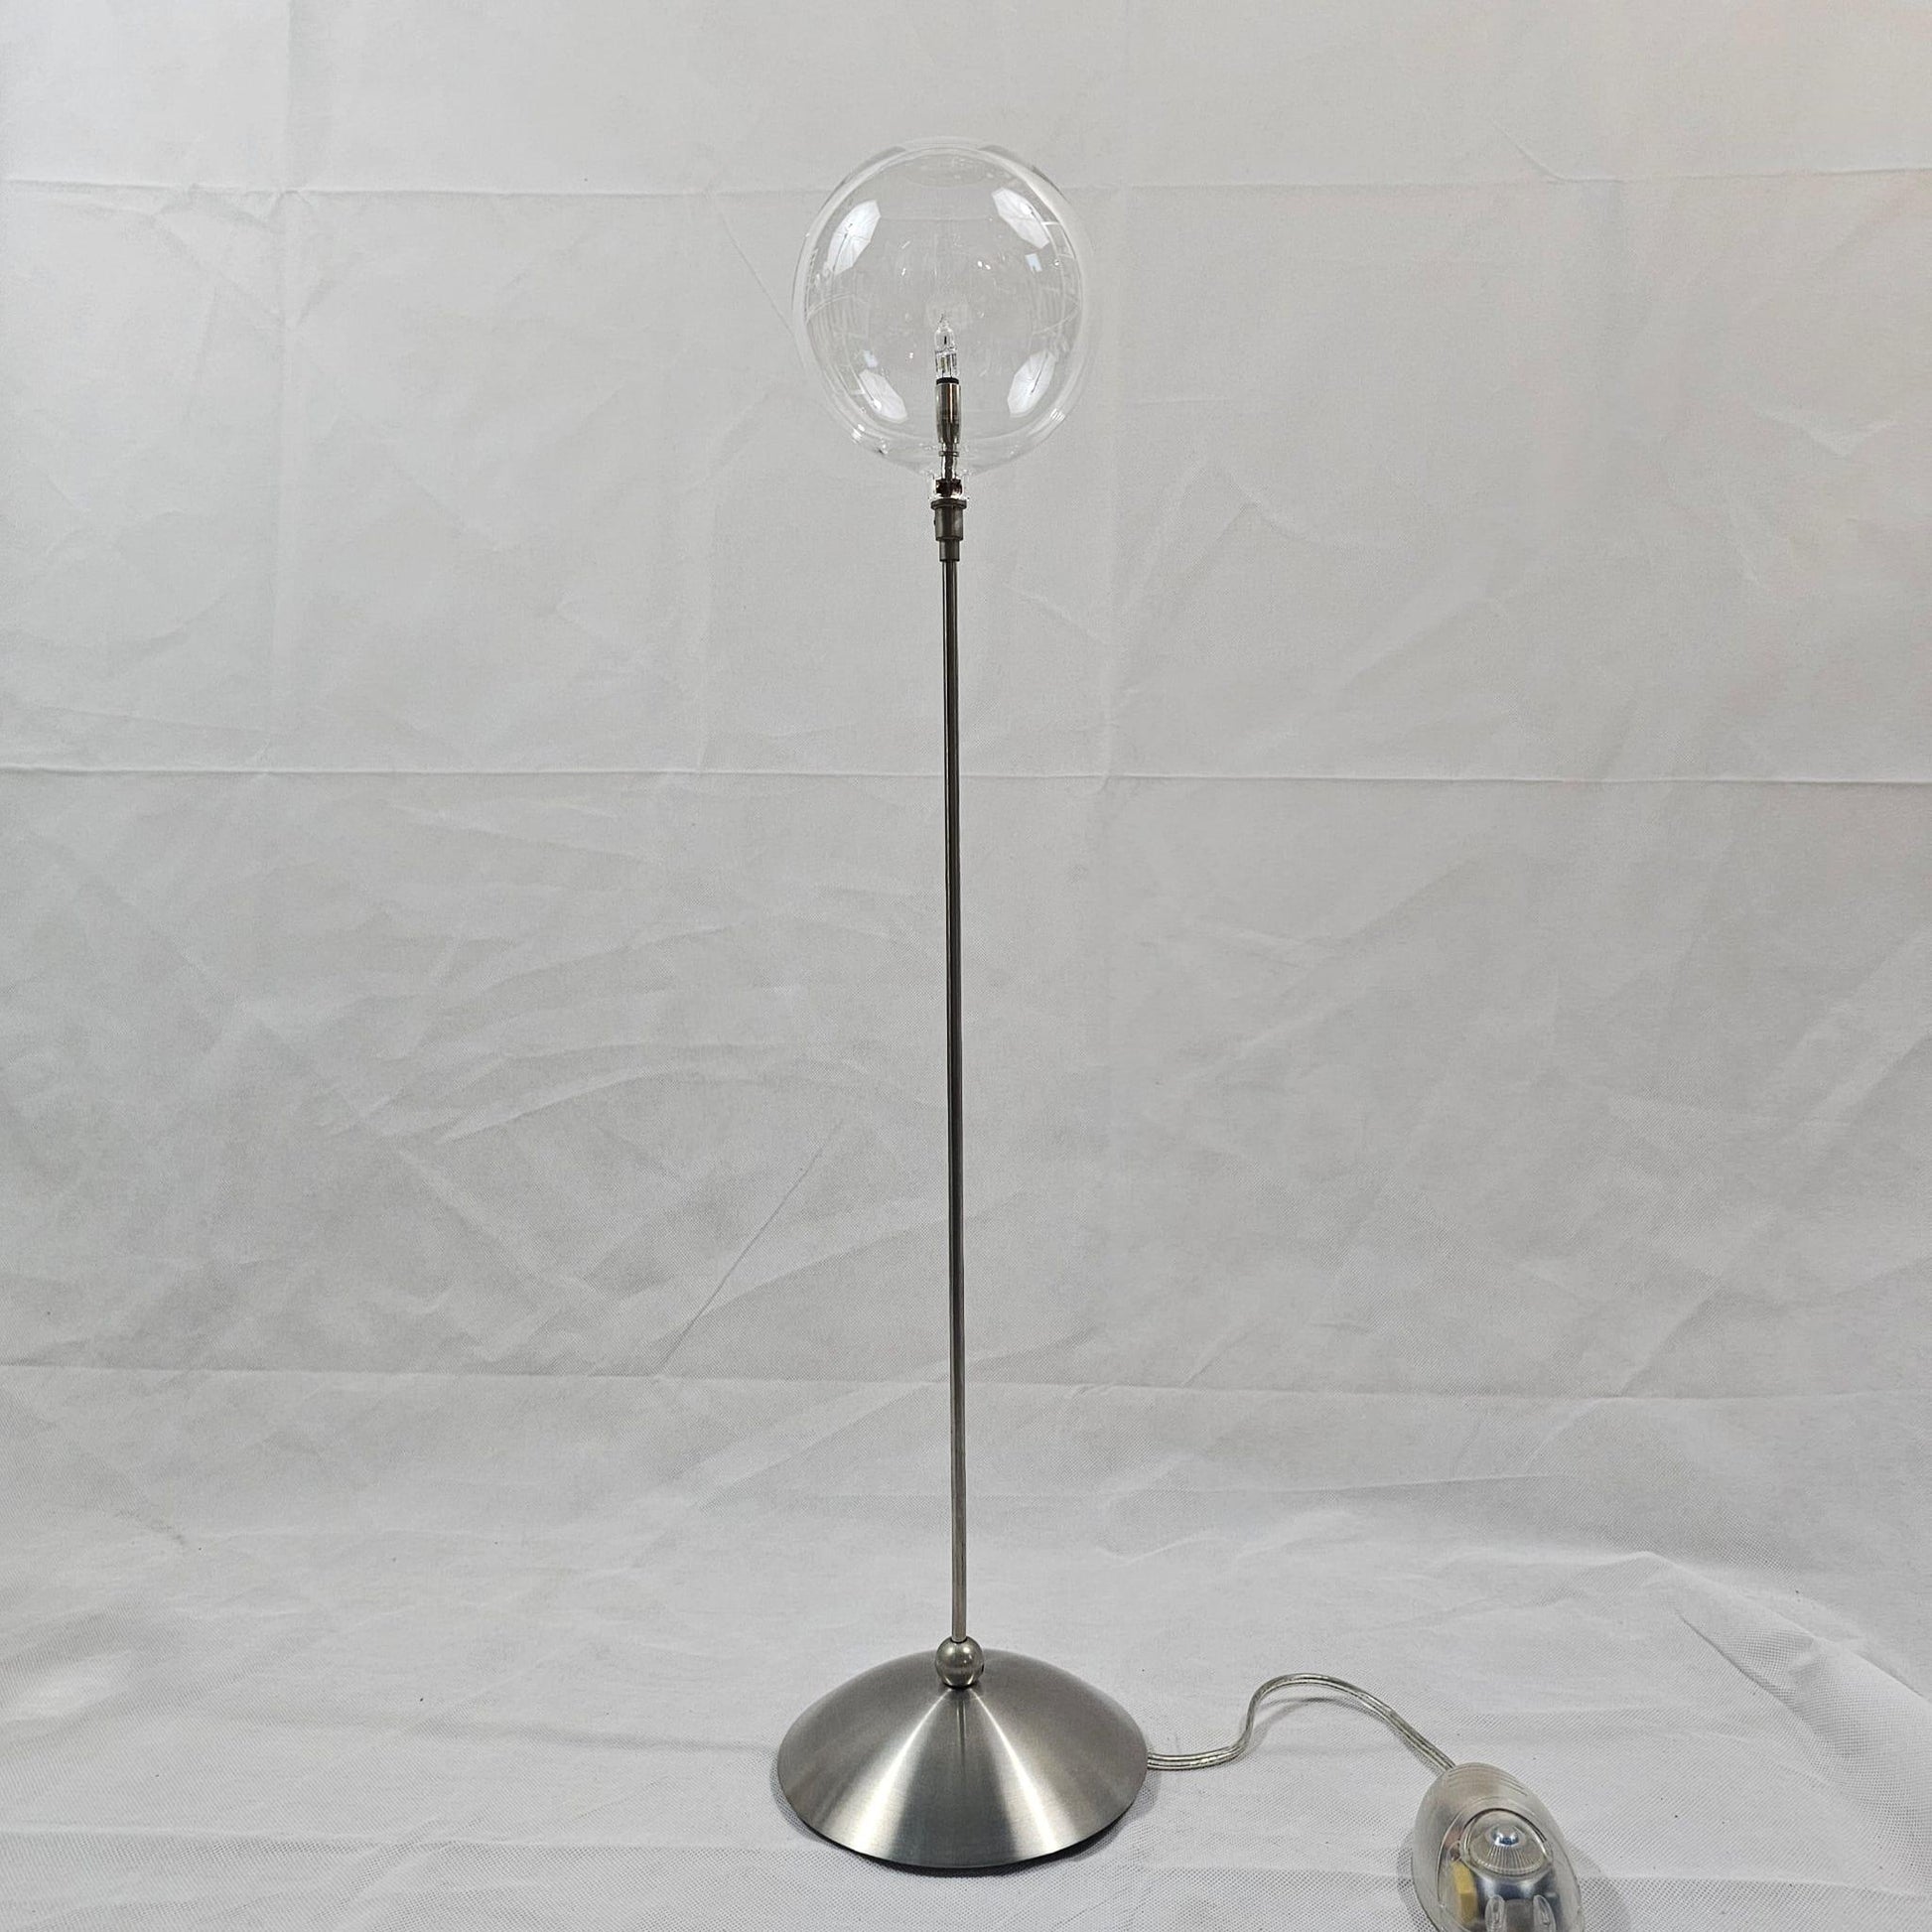 Harco Loor riddle tl1 lamp